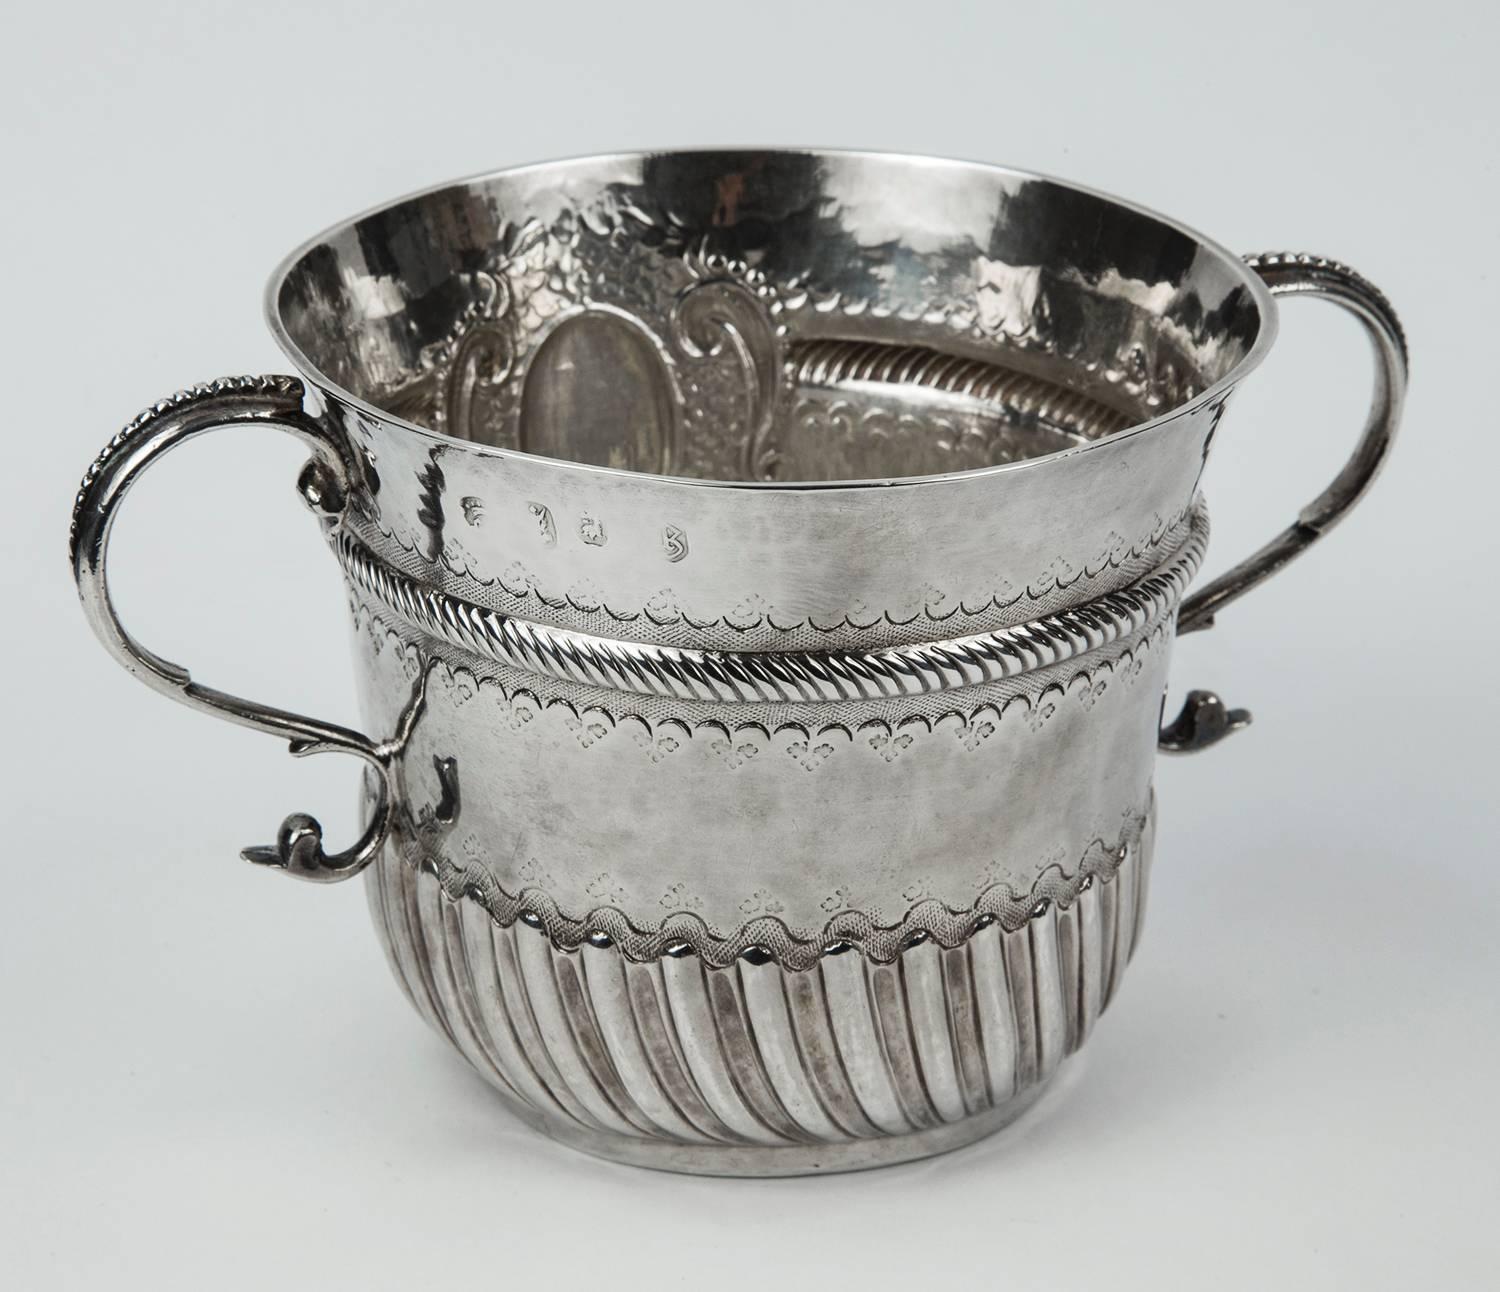 Rare Antique Britannia Silver Double Handle Presentation Cup. Circular form with slightly tapered body, spiral Gadroon punch work and Finely chased lower section with scroll and a chased Rocaille Cartouche. Twin stylized Swan Handles with beaded